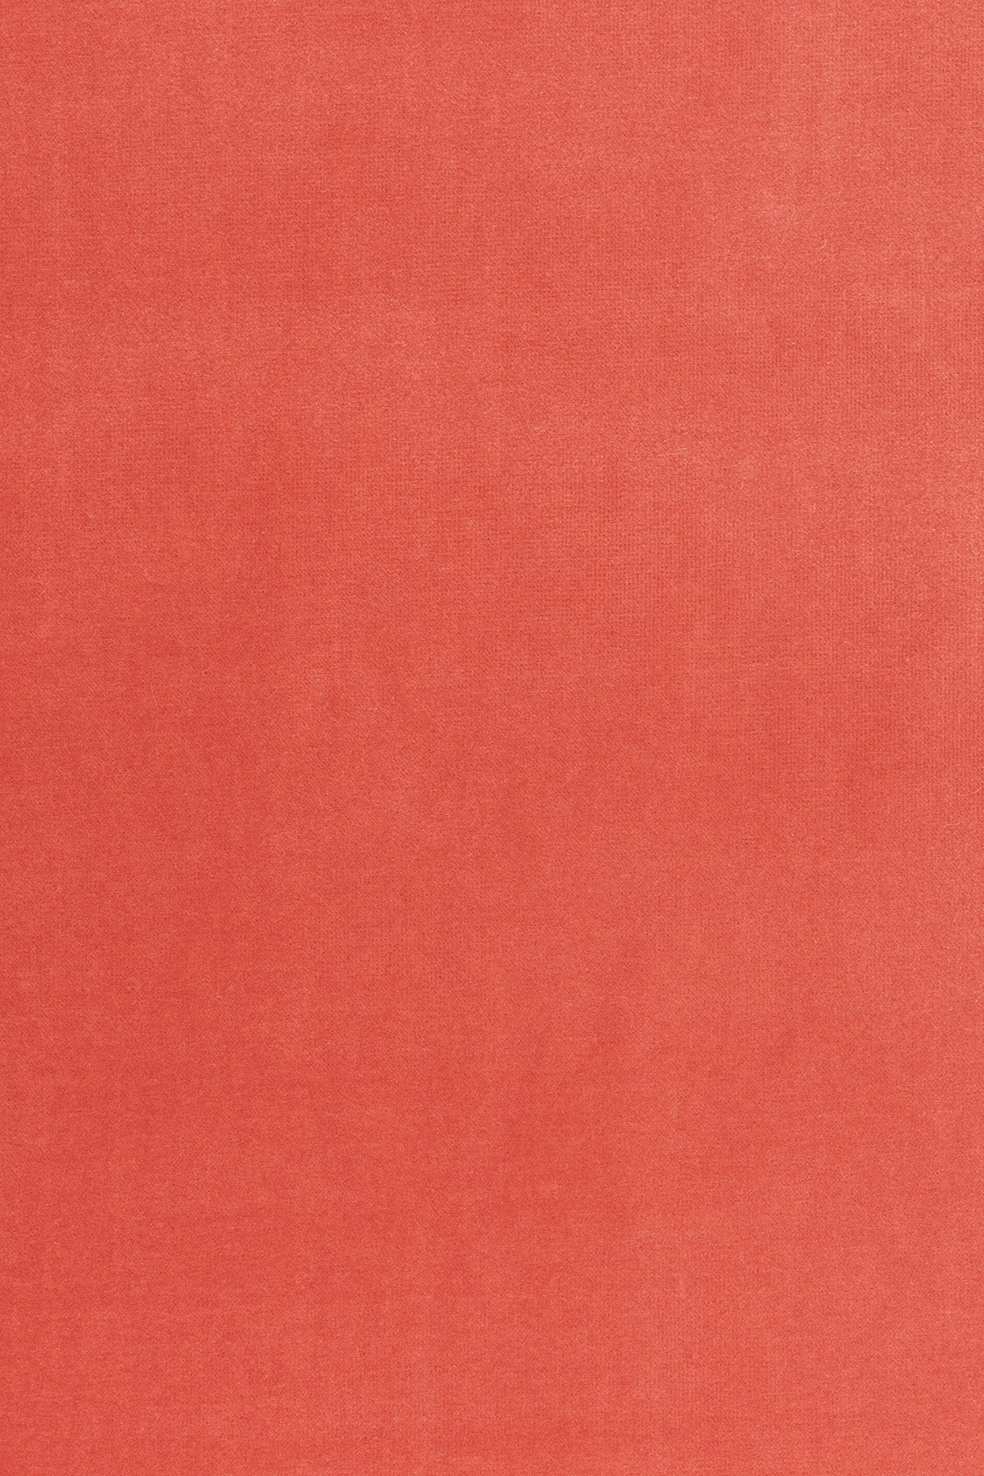 Fabric sample Harald 3 543 red